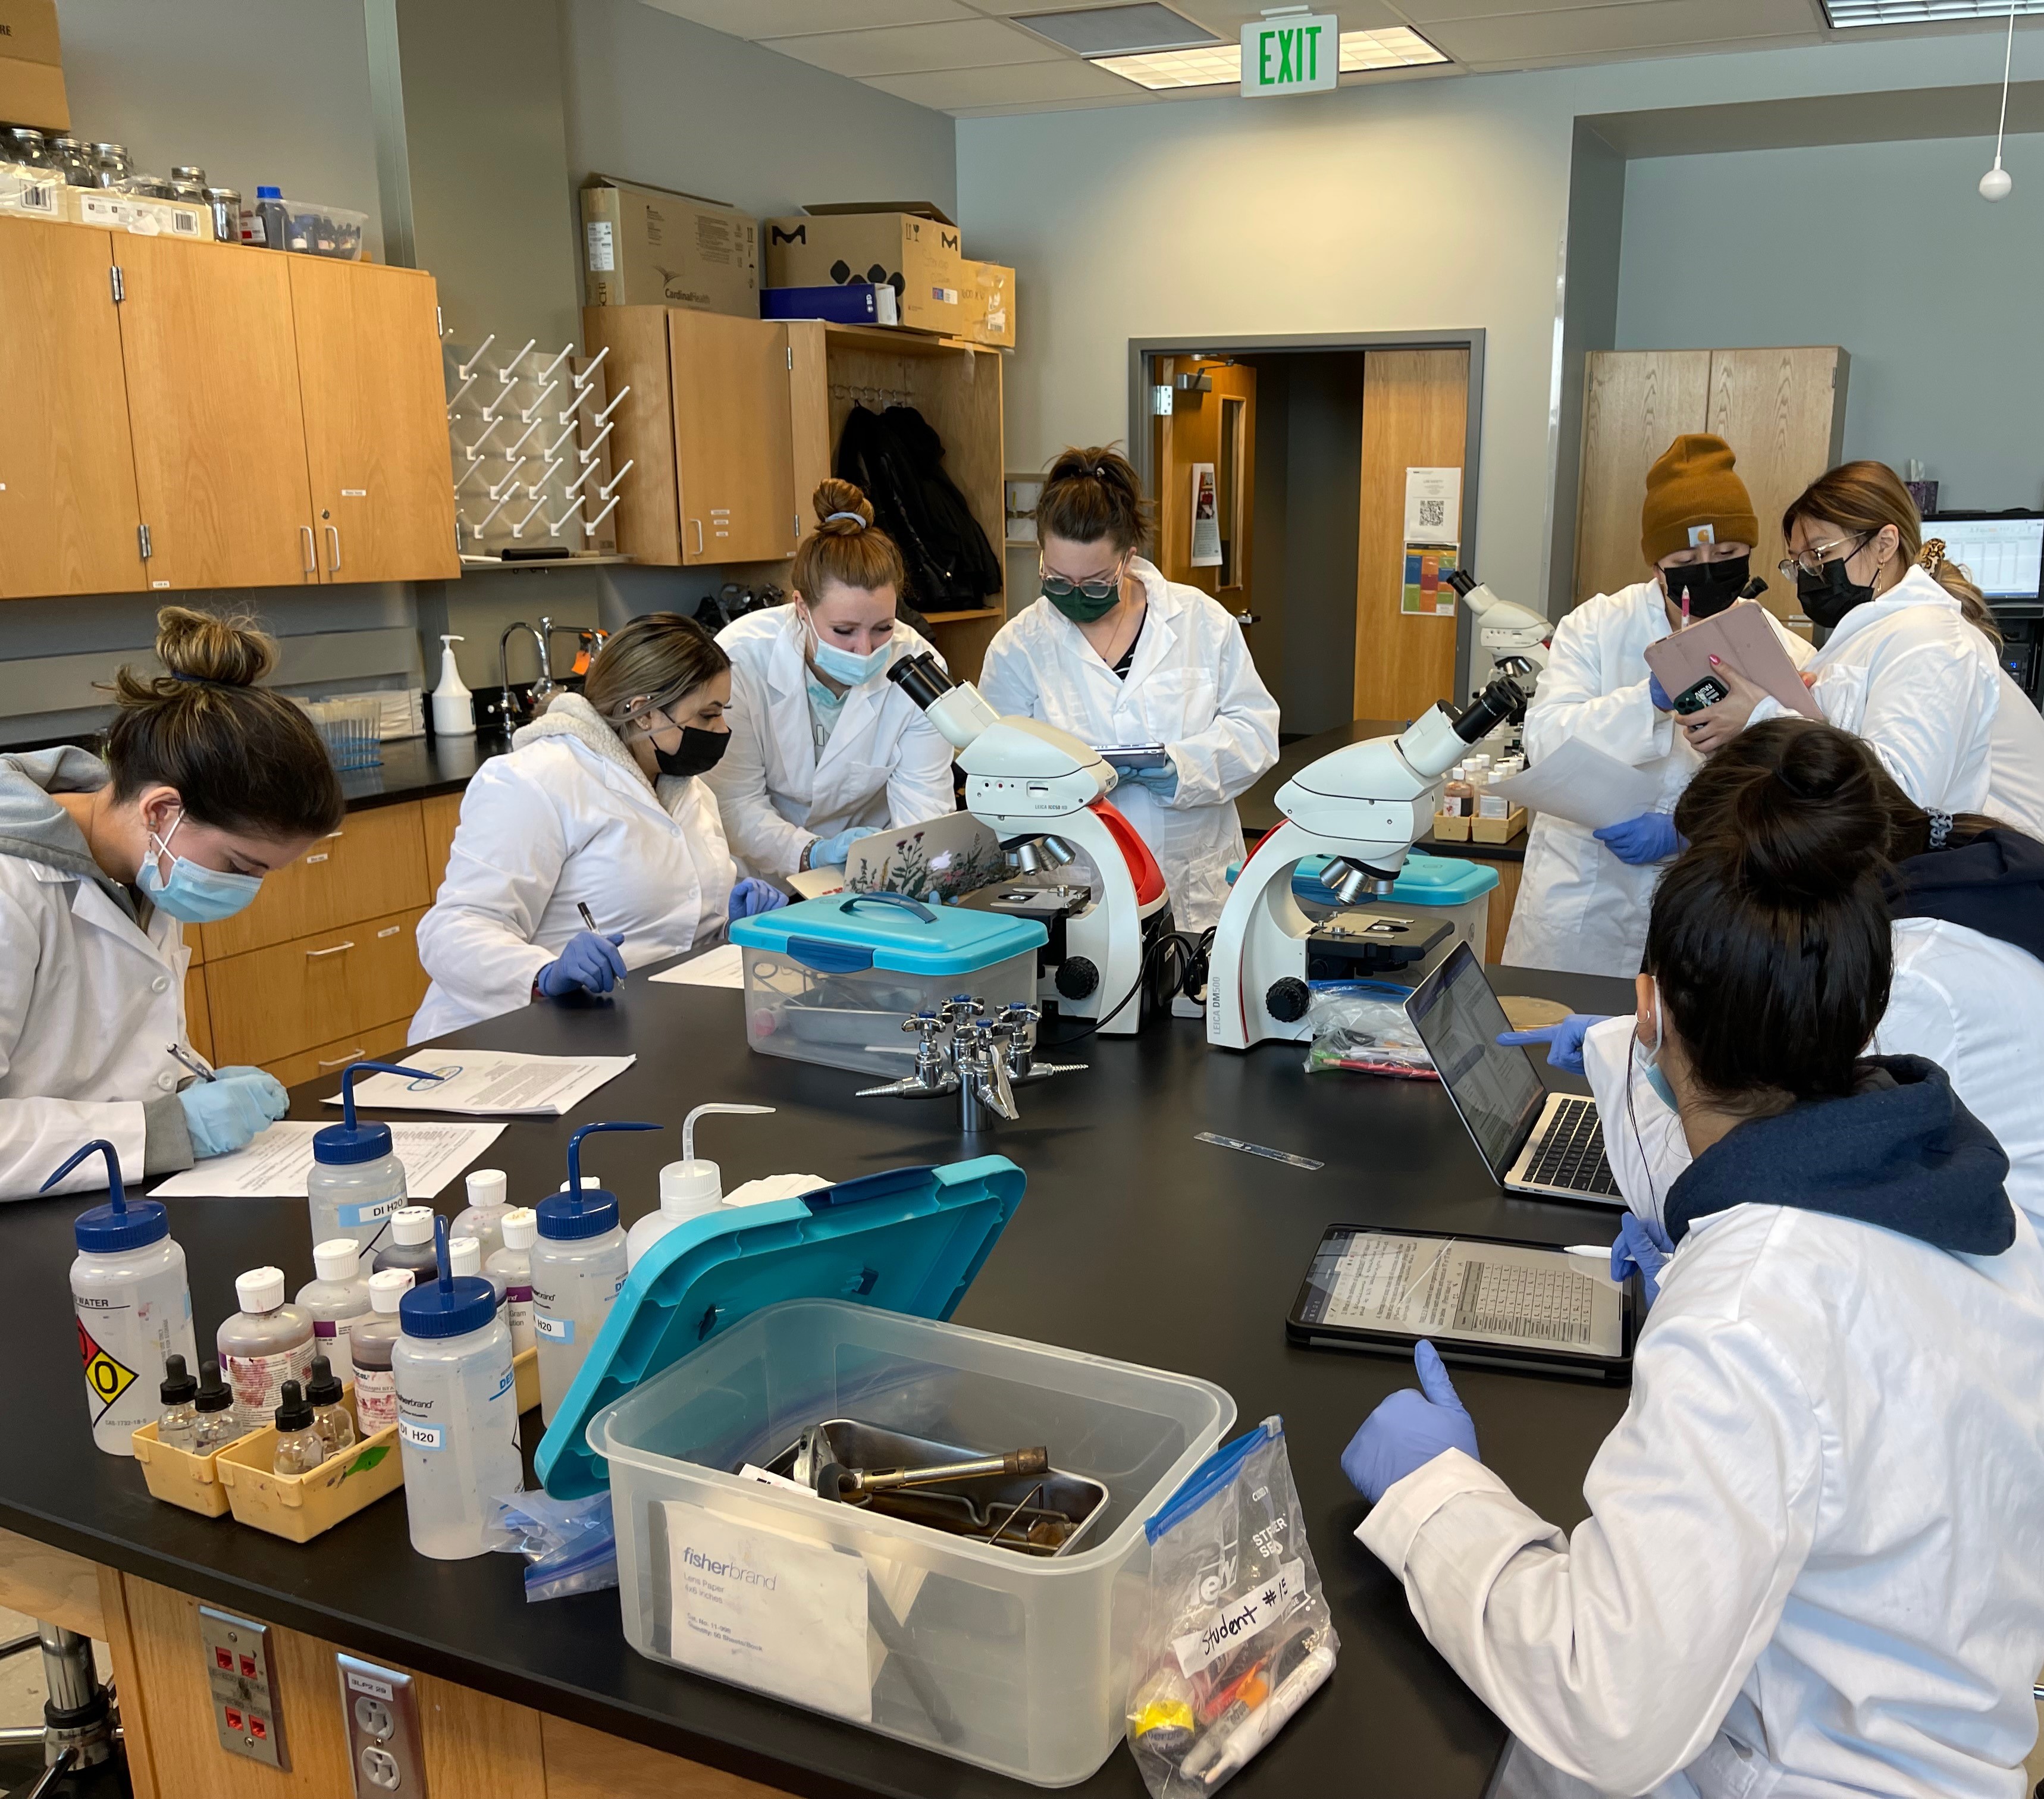 students in lab coats using equipment